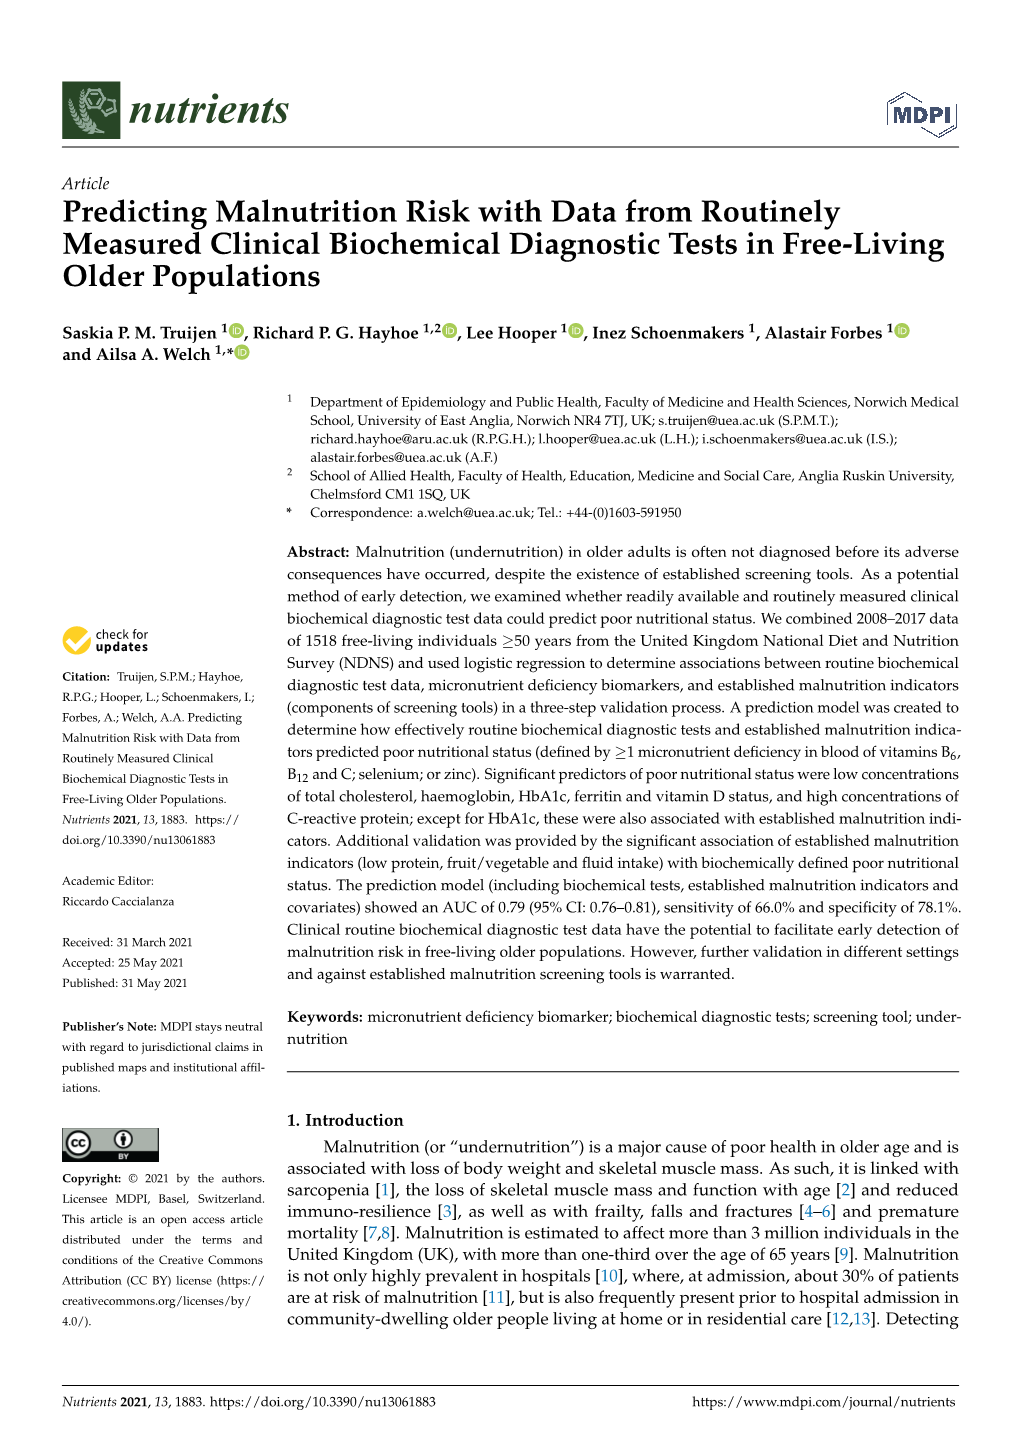 Predicting Malnutrition Risk with Data from Routinely Measured Clinical Biochemical Diagnostic Tests in Free-Living Older Populations